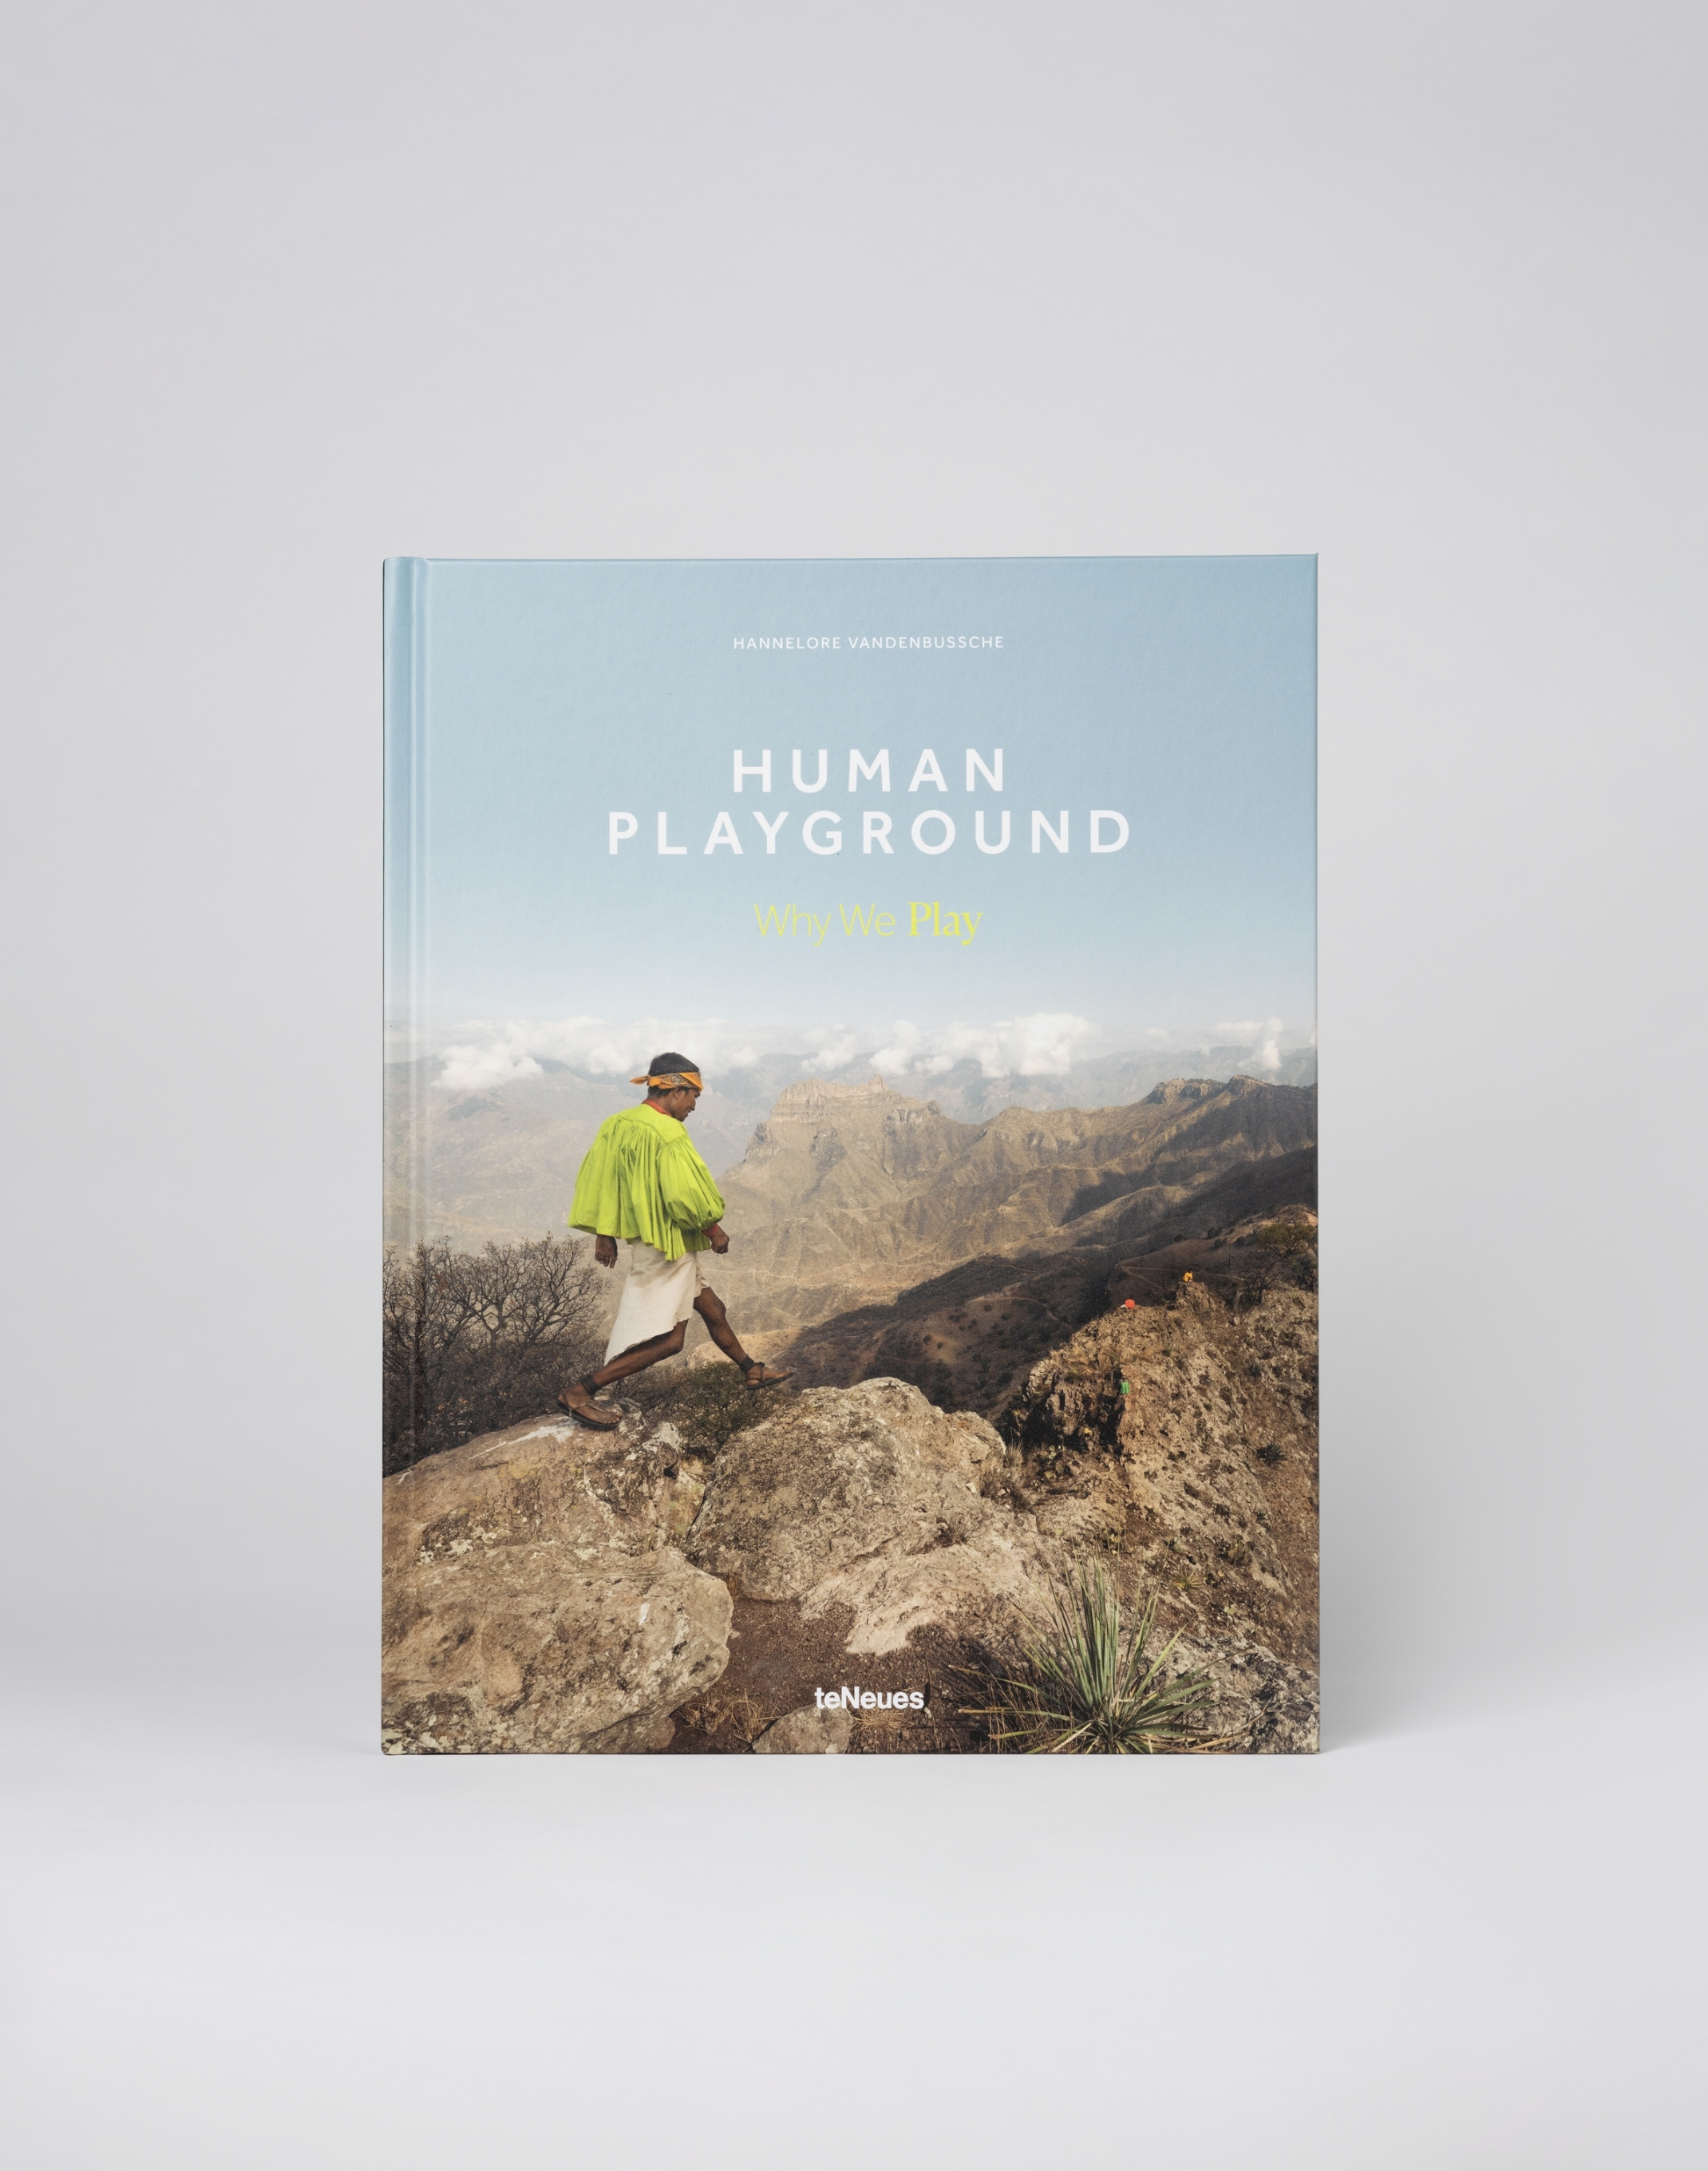 Human Playground book front II v2